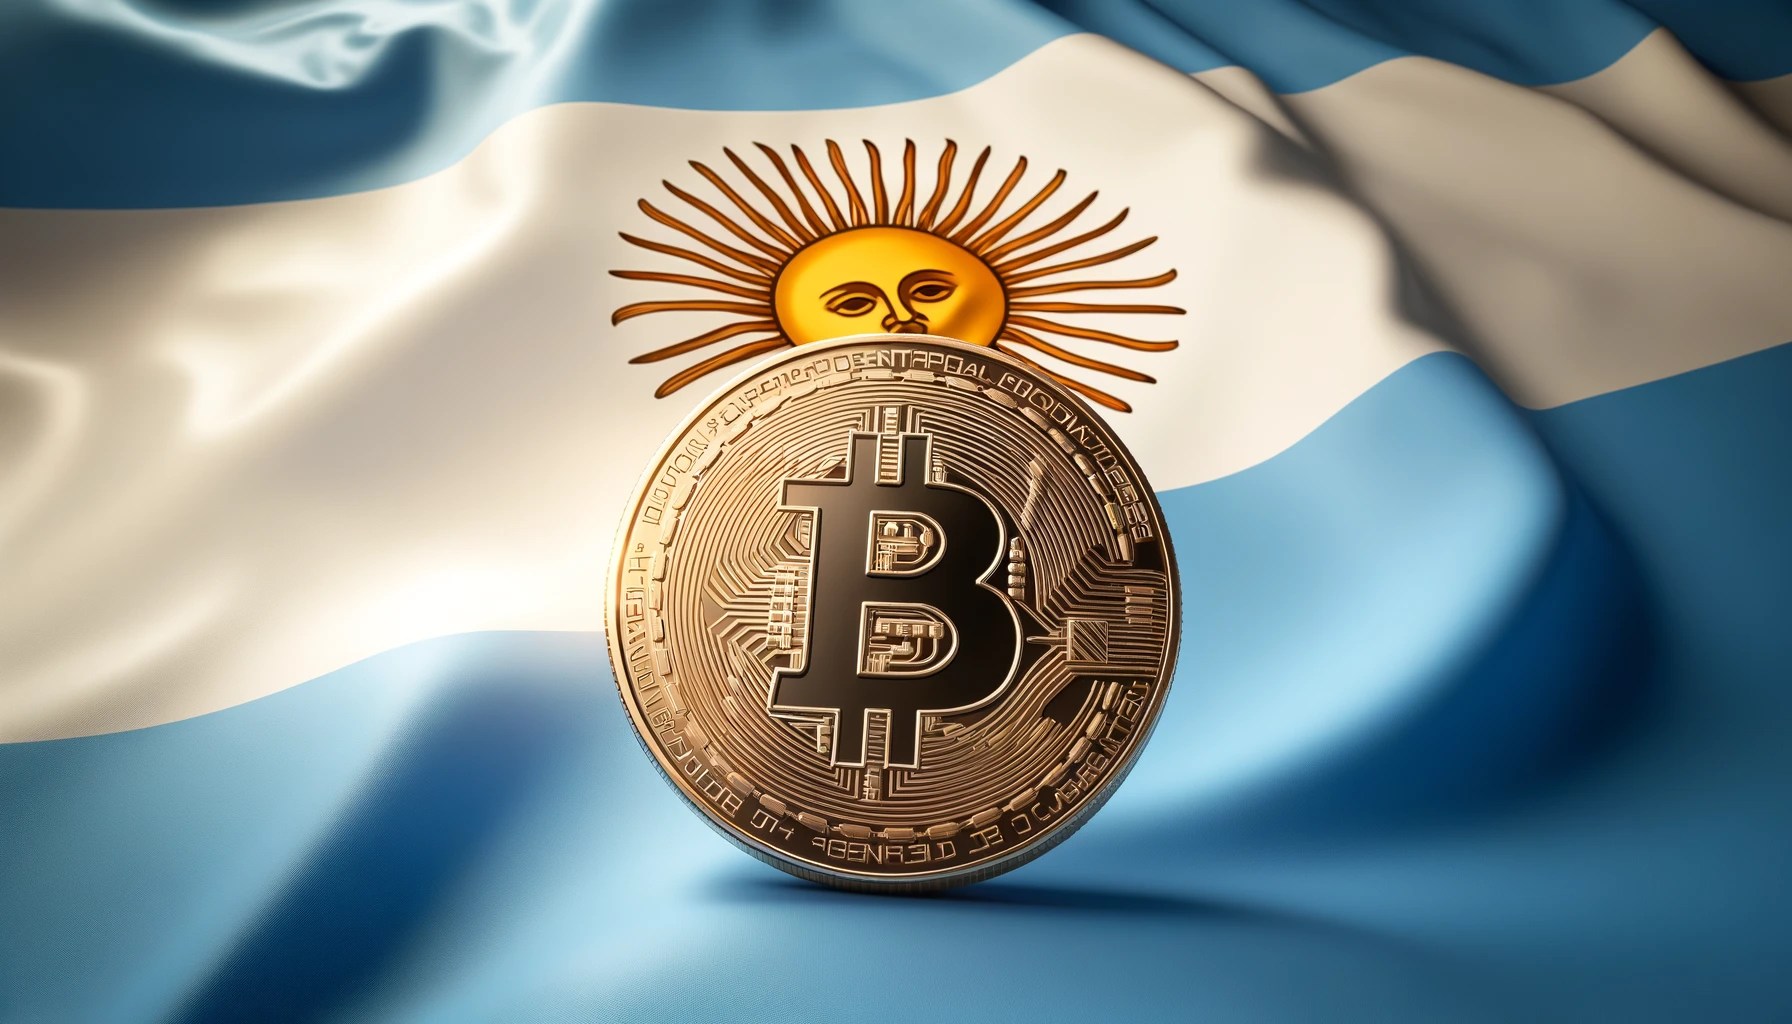 Argentina state owned Bitcoin Mining